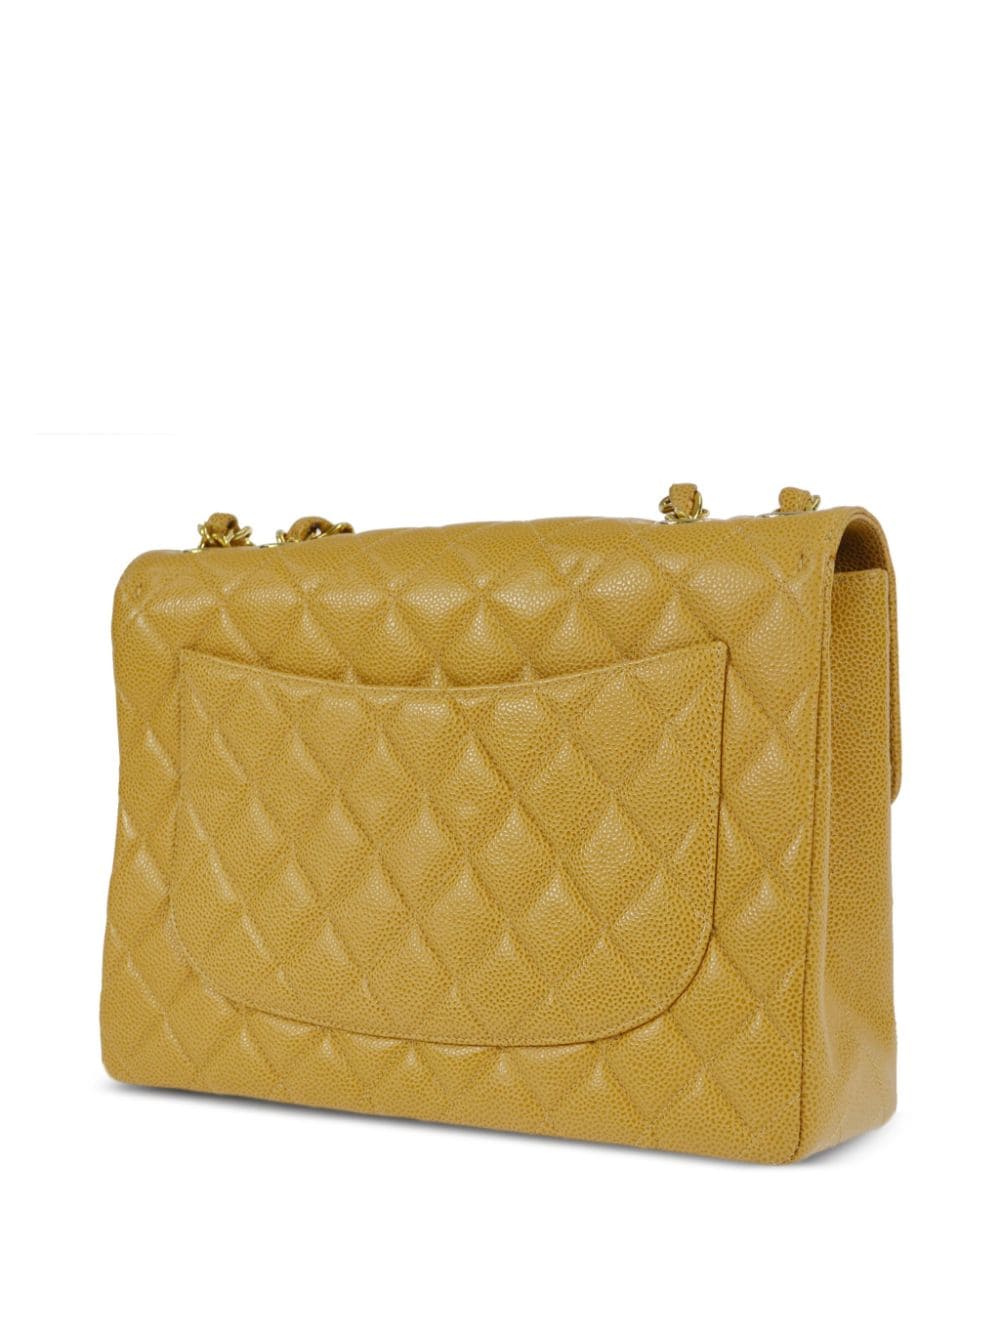 CHANEL Pre-Owned 2002 grote Classic Flap schoudertas - Beige